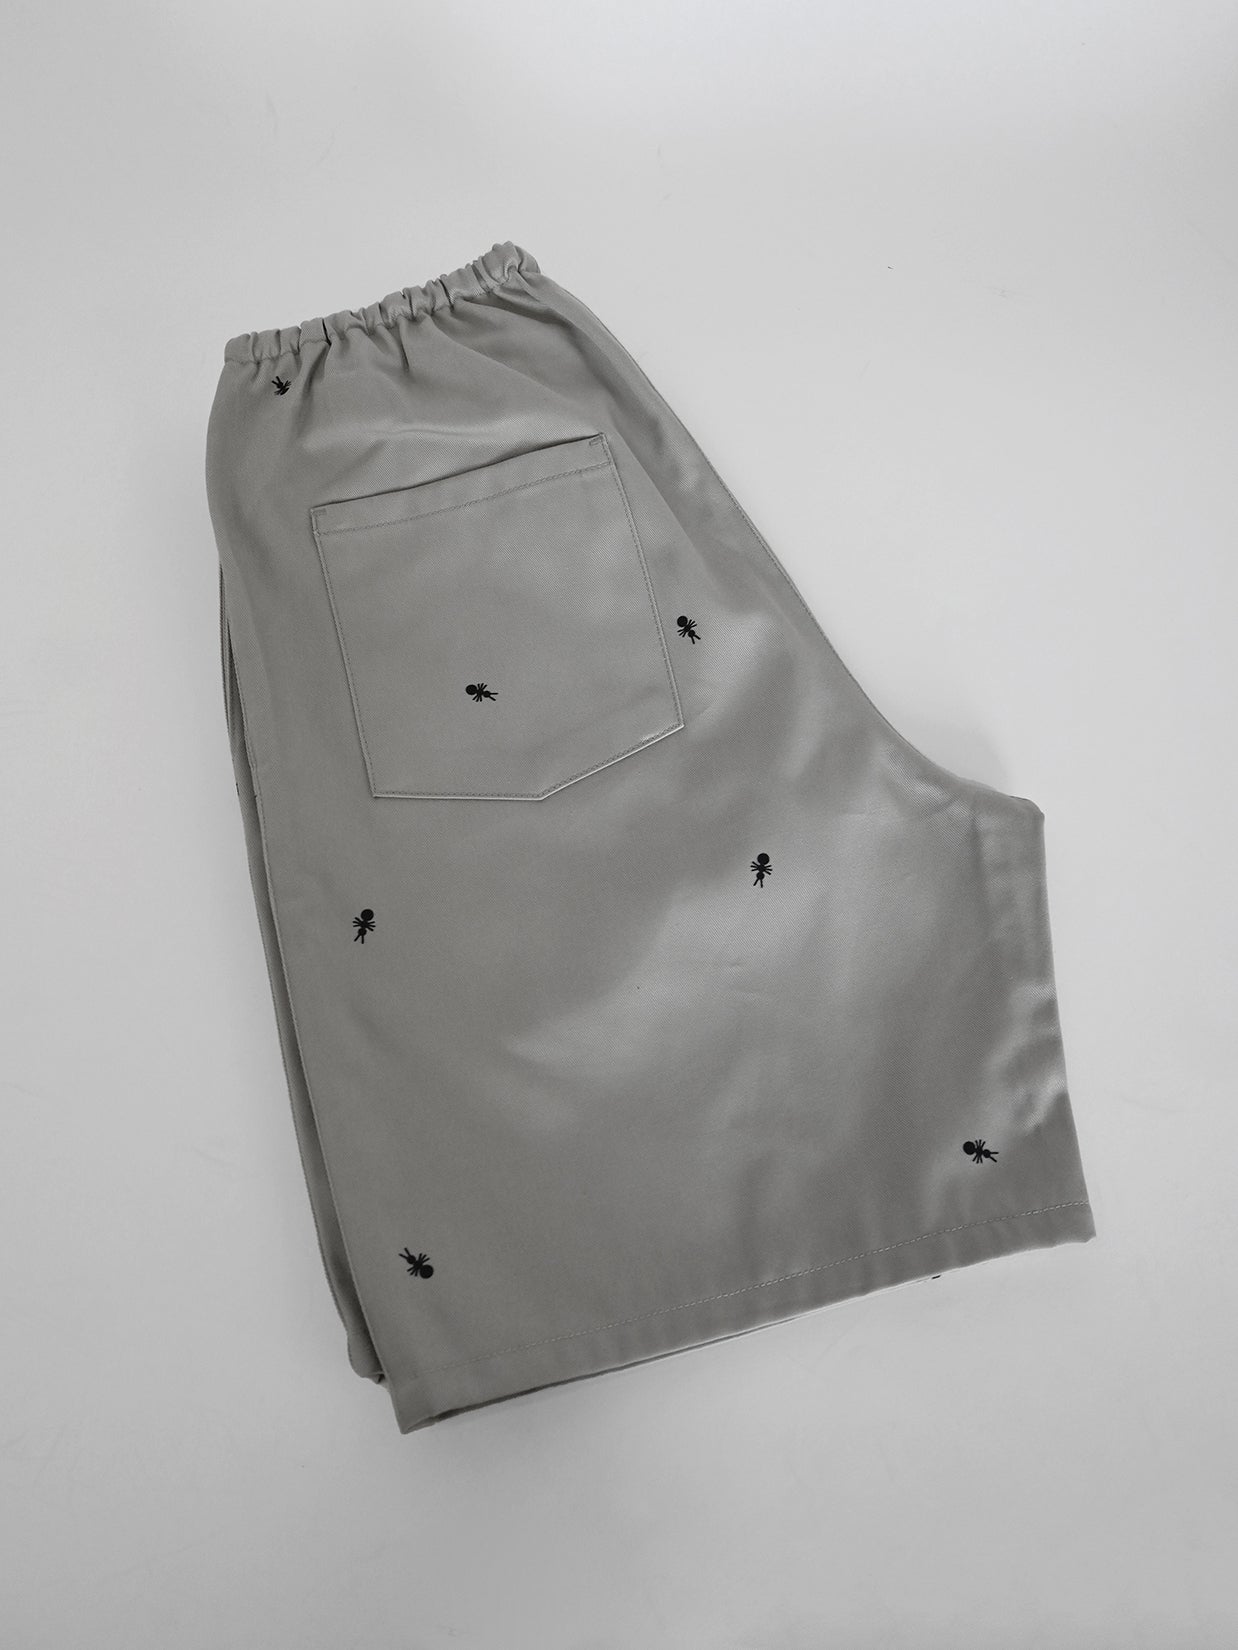 HO HOS HOLE IN THE WALL brand  "Ants on Your Pants" Shorts. Pearl Grey colorway